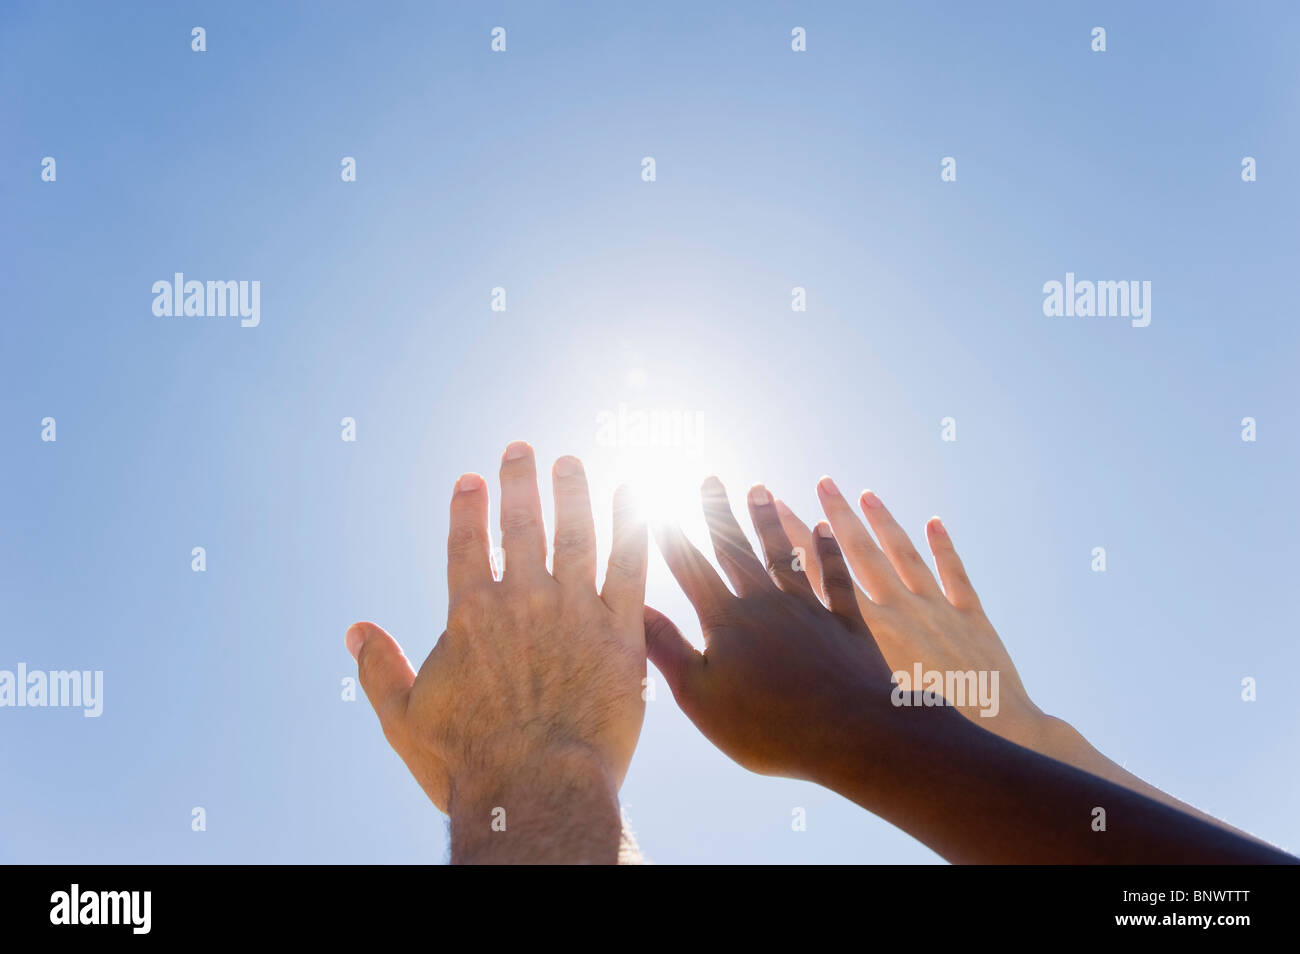 Hands held up in front of sunshine Stock Photo